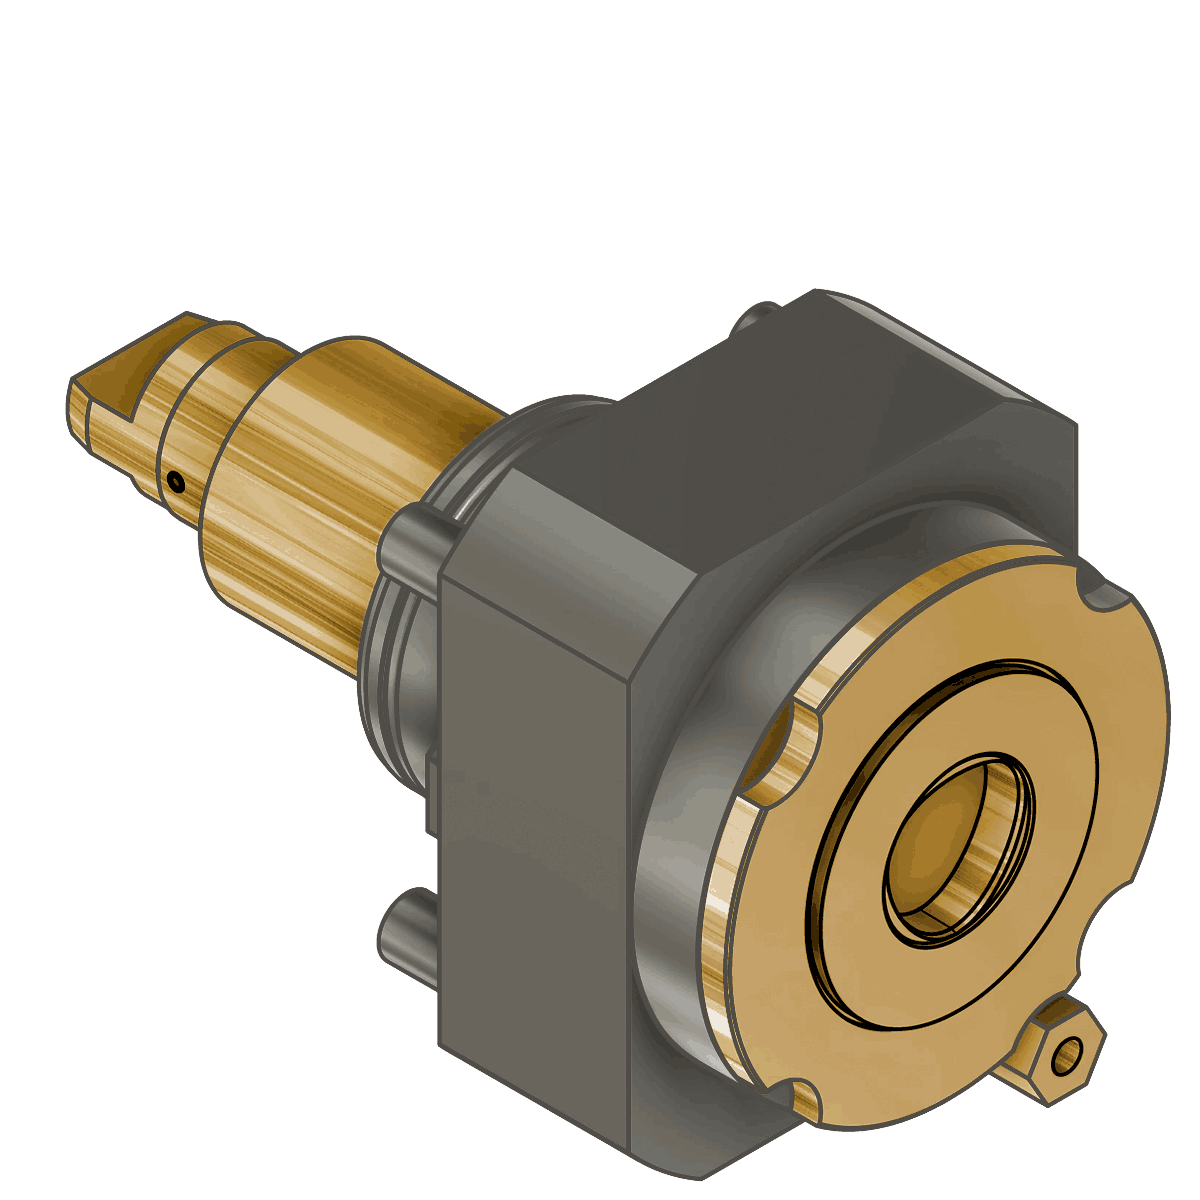 7. NTR Radial driven tool with Capto coupling